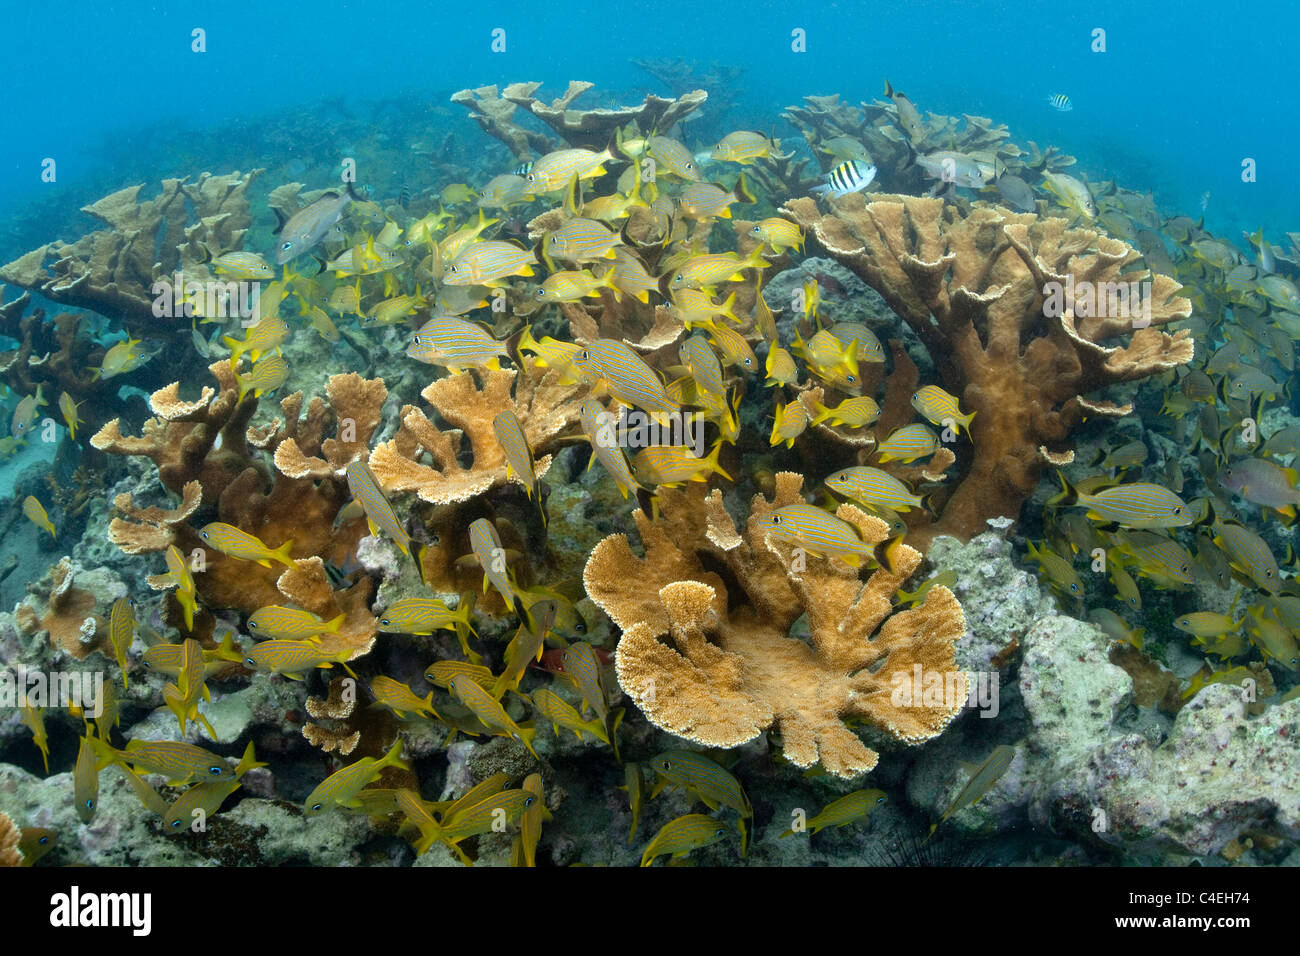 A healthy stand of Elkhorn coral is home to a variety of fish at Jardines de la Reina in Cuba. Stock Photo